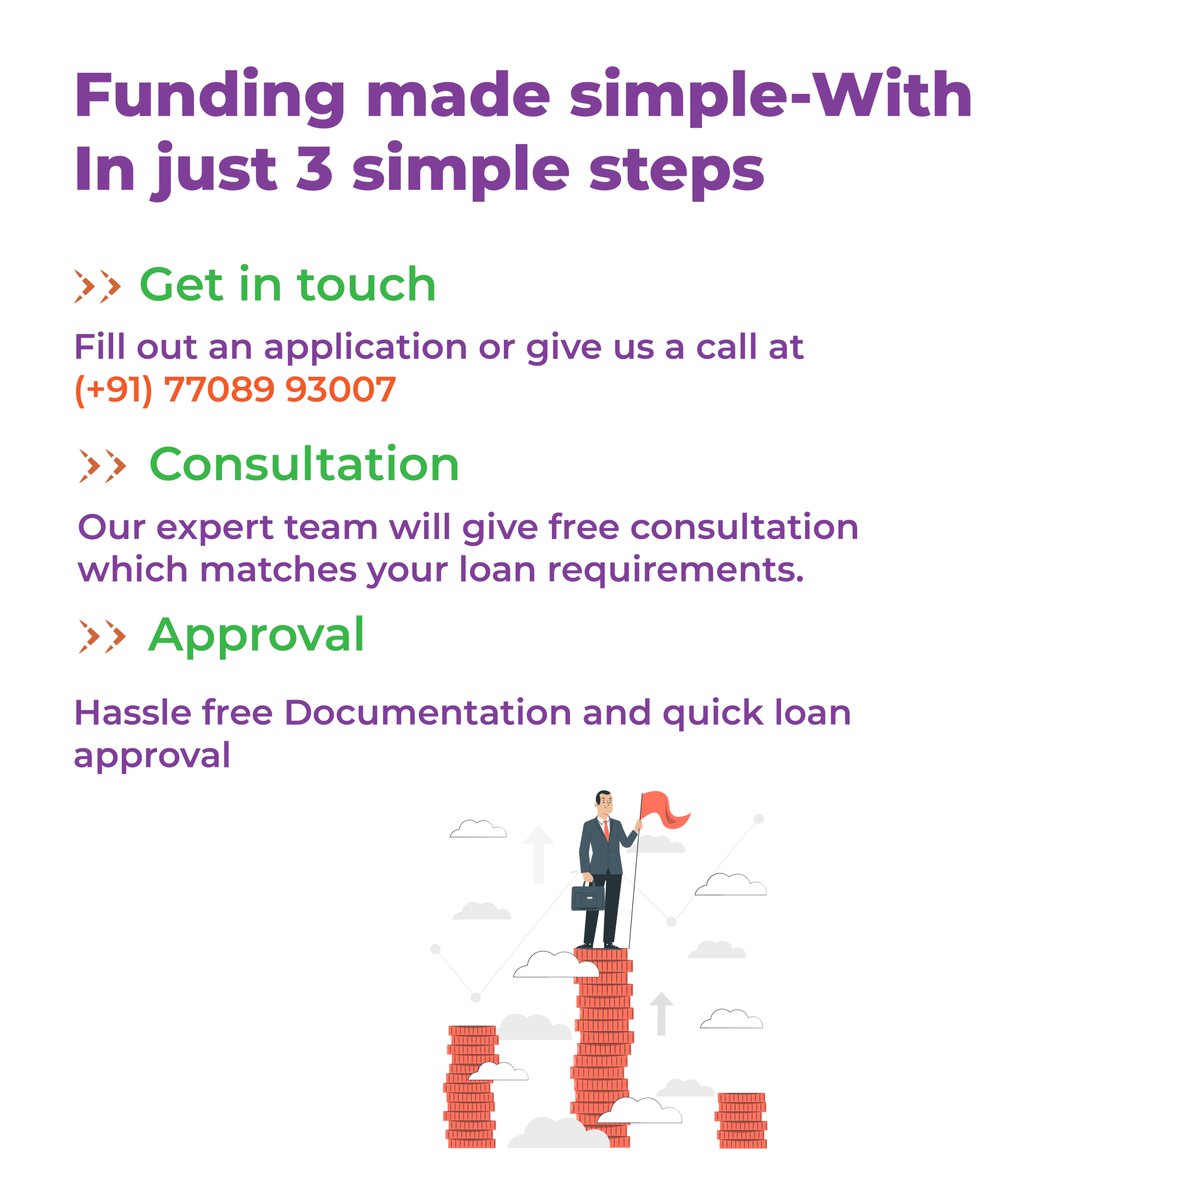 'From inquiry to approval – a seamless journey in 3 steps

Your financial journey simplified! 

Apply now: prudentcapital.co.in/contact/
Call us at:(+91) 77089 93007'
#prudentcapital #businessloans #3simplesteps #easyfunding #fundingsimplified #fundingmadeeasy